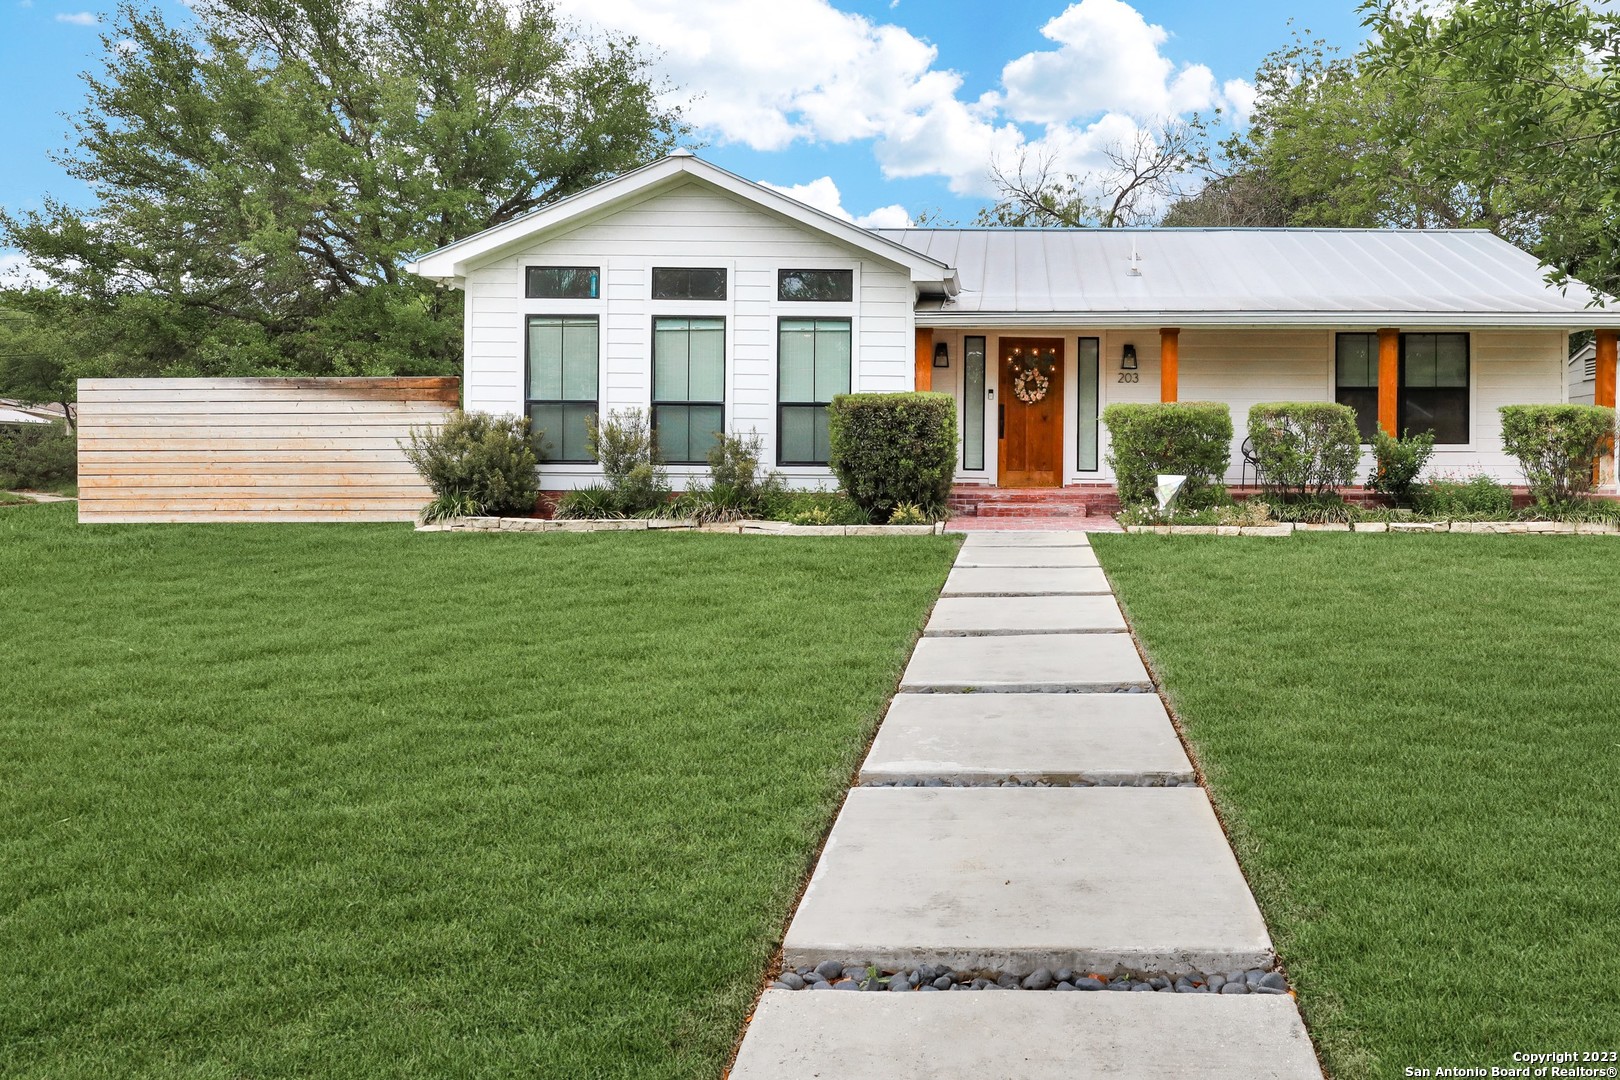 Beautiful Single Story on large corner lot in Alamo Heights Schools! Home was rebuilt in 2018 w/ a Modern Farmhouse design to include Light Wood Floors throughout, High Ceilings w/ Wood Beam, Custom Built-In's, Gas Fireplace & the perfect Open Floor Plan for entertaining! Gorgeous Chefs Kitchen features a Large Island, Breakfast Bar, Farmhouse Sink w/ Reverse Osmosis Filtration System, Wine Refrigerator, & GAS Cooking. XL Laundry Room w/ Custom Cabinets offering plenty of storage, Folding Station, & Mud Bench upon entry. Owner Suite w/ Outdoor Access, Luxury Bathroom w/ Separate Tub and XL Walk-in Shower w/ Rain Shower head, & Custom Designed Owner Closet. A true must see!